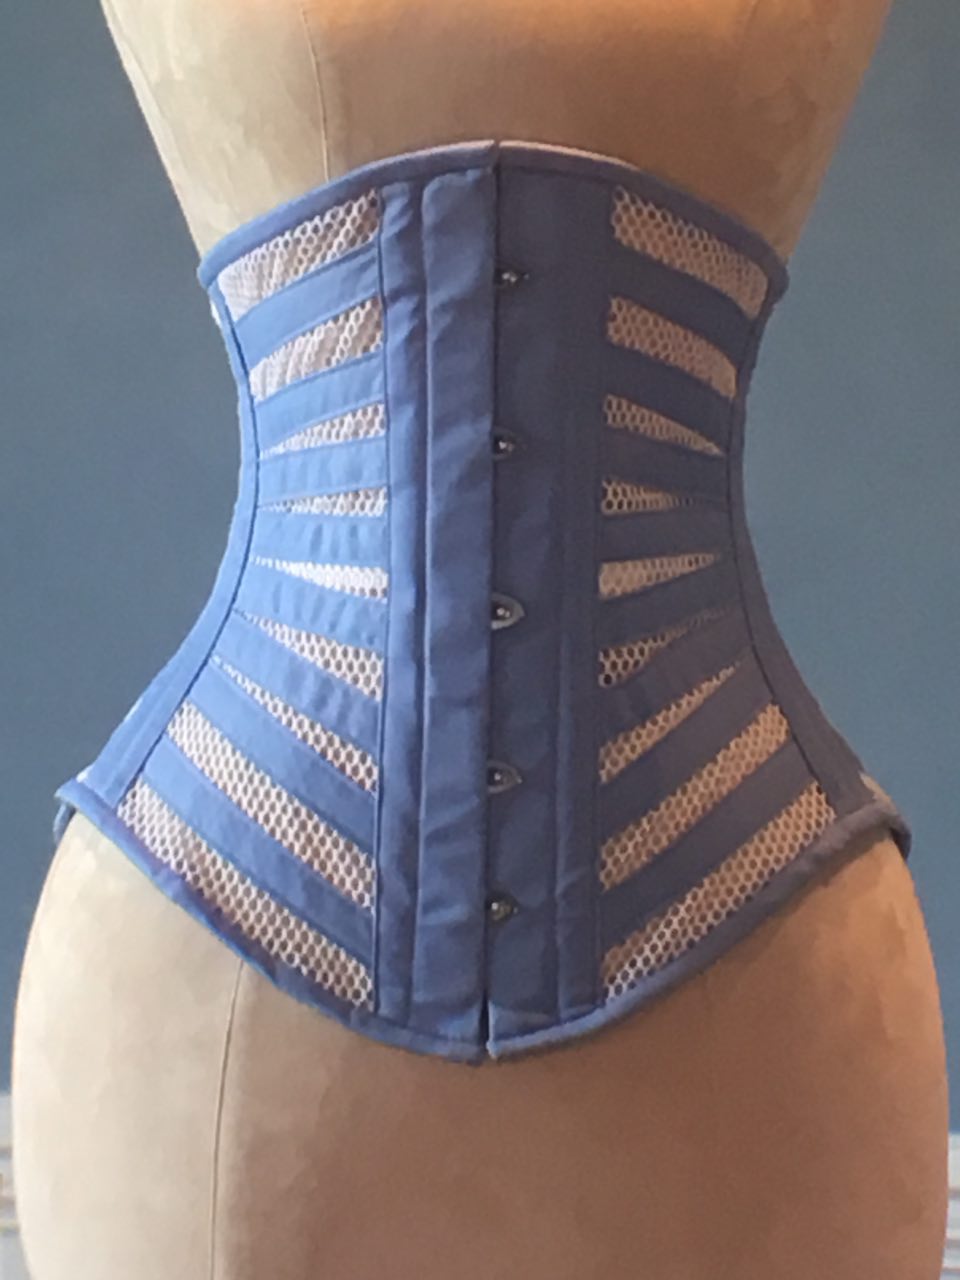 Real double row steelboned underbust cotton corset. Waisttraining fitness  edition. Comfortable made to measures corset for waisttraining